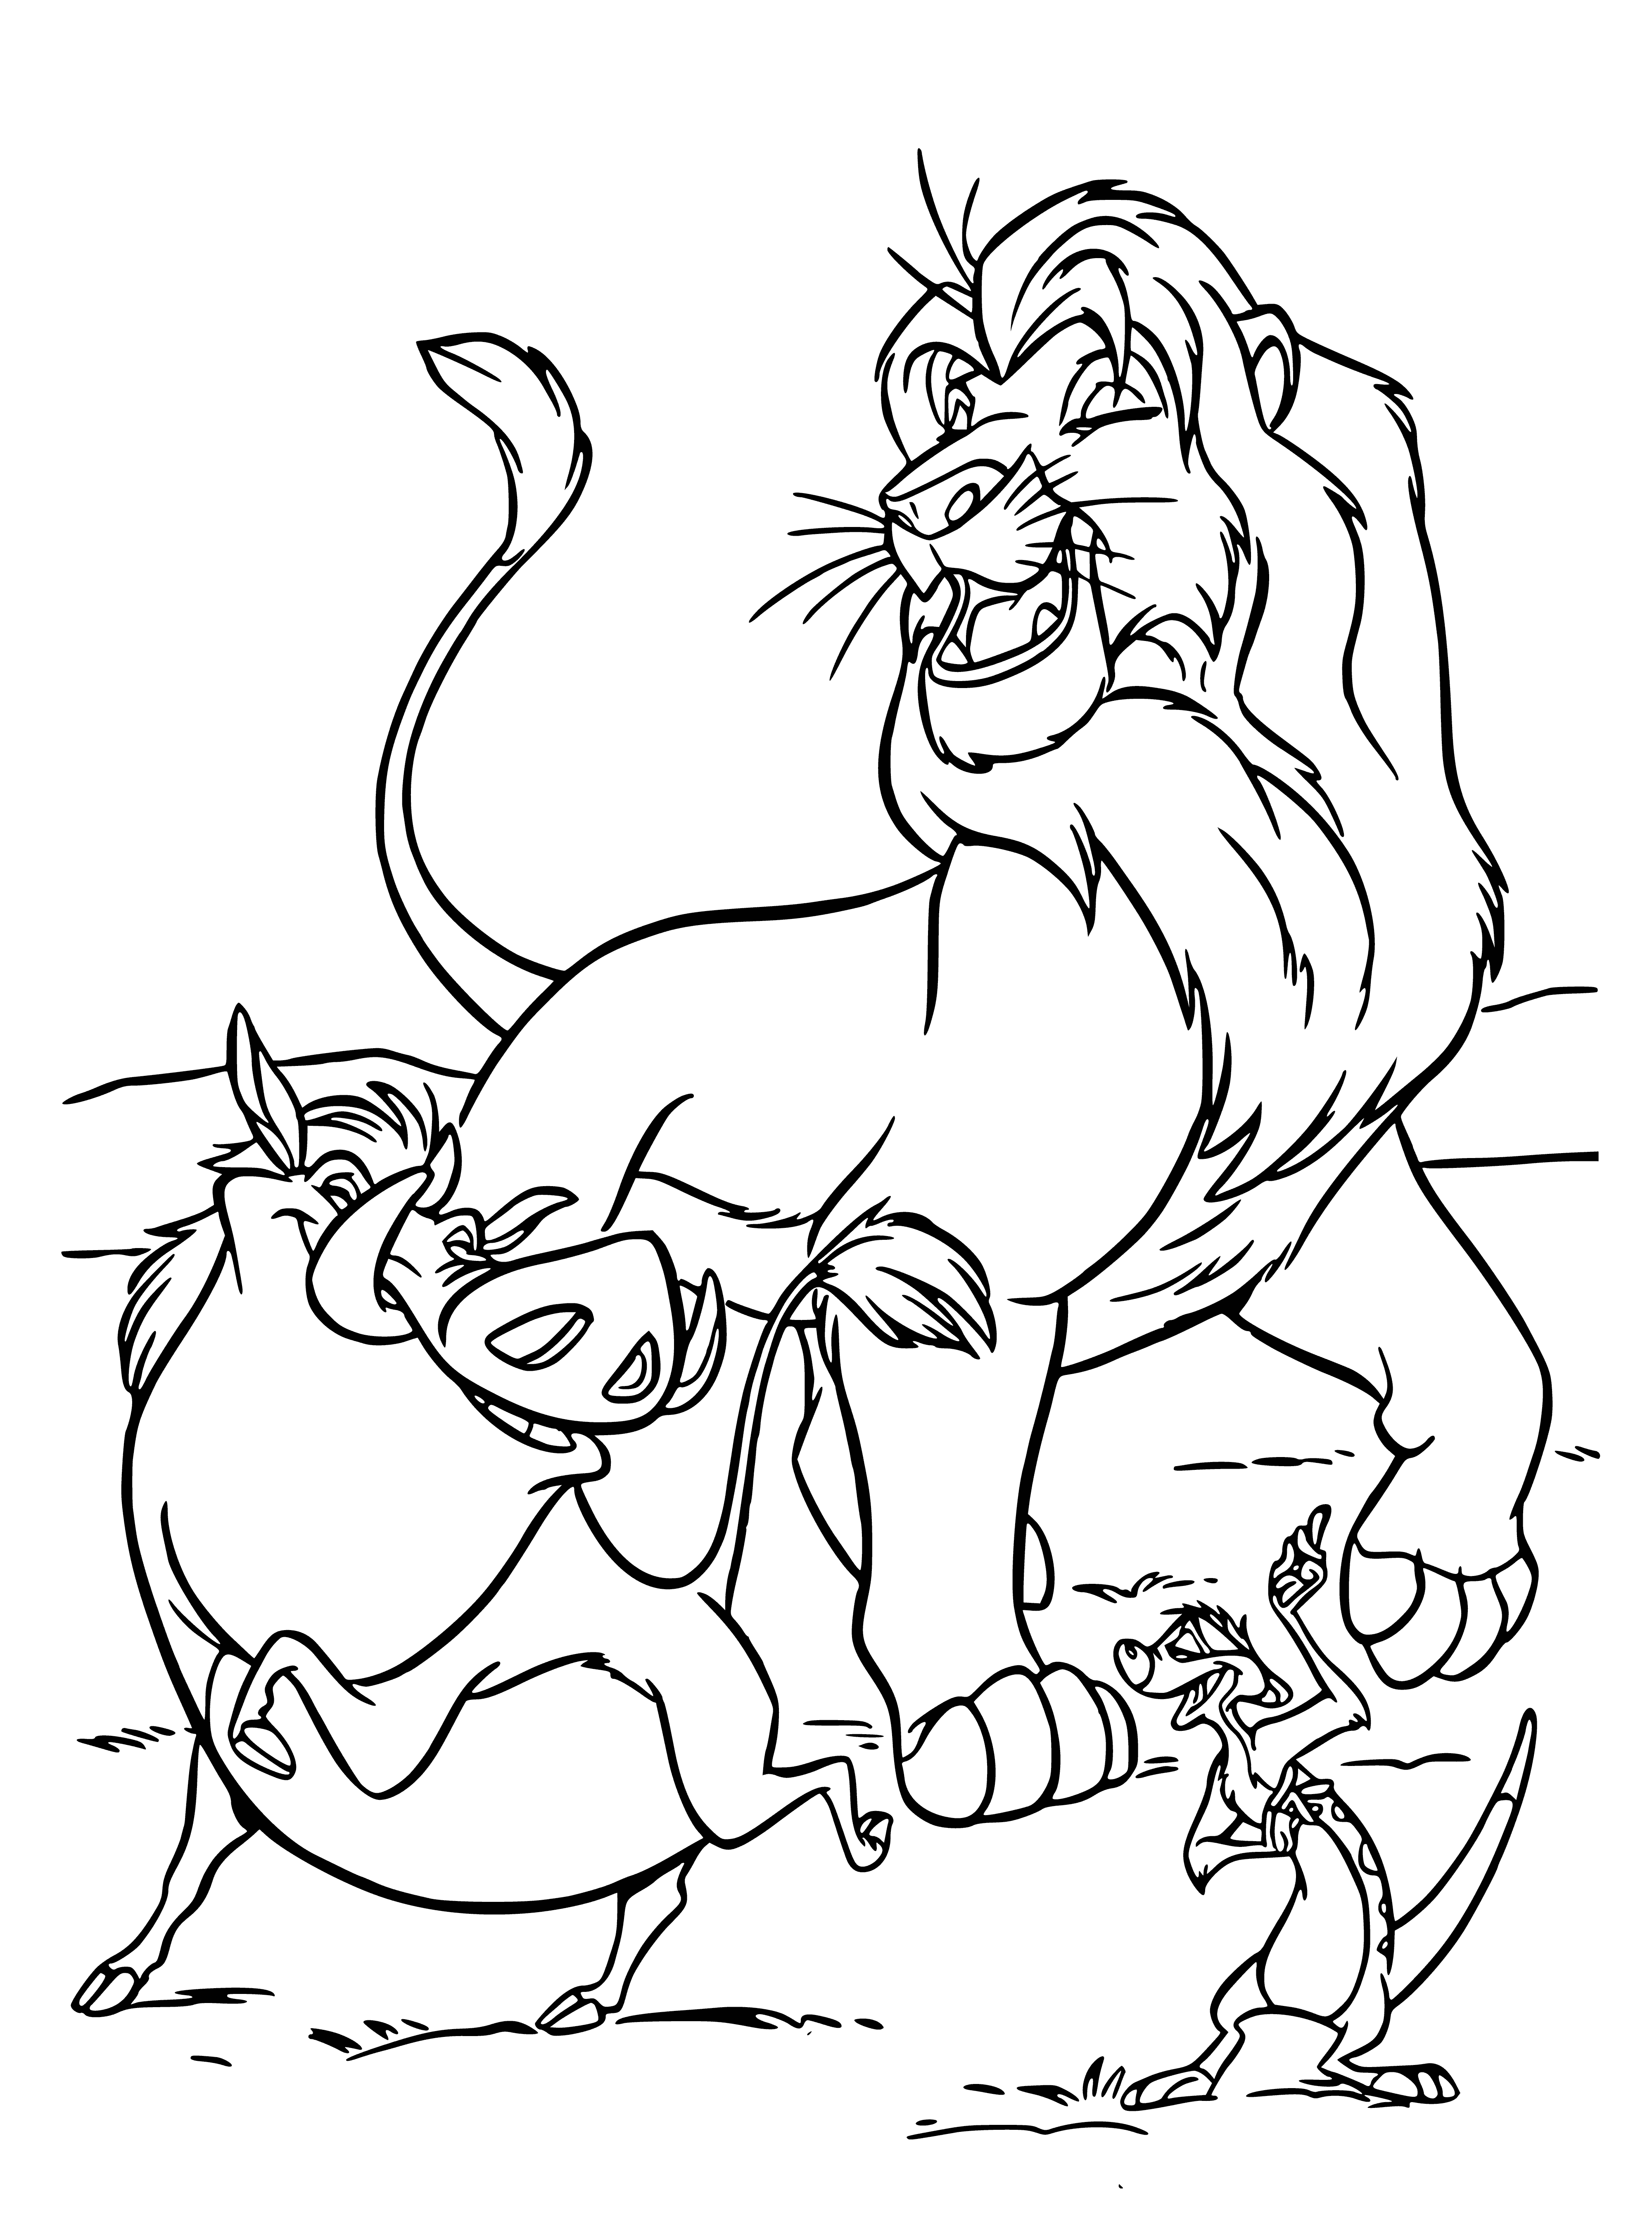 coloring page: Lying lion with a thick golden mane in center of coloring page, surrounded by grassy plain, trees, bushes, water & bright blue sky.